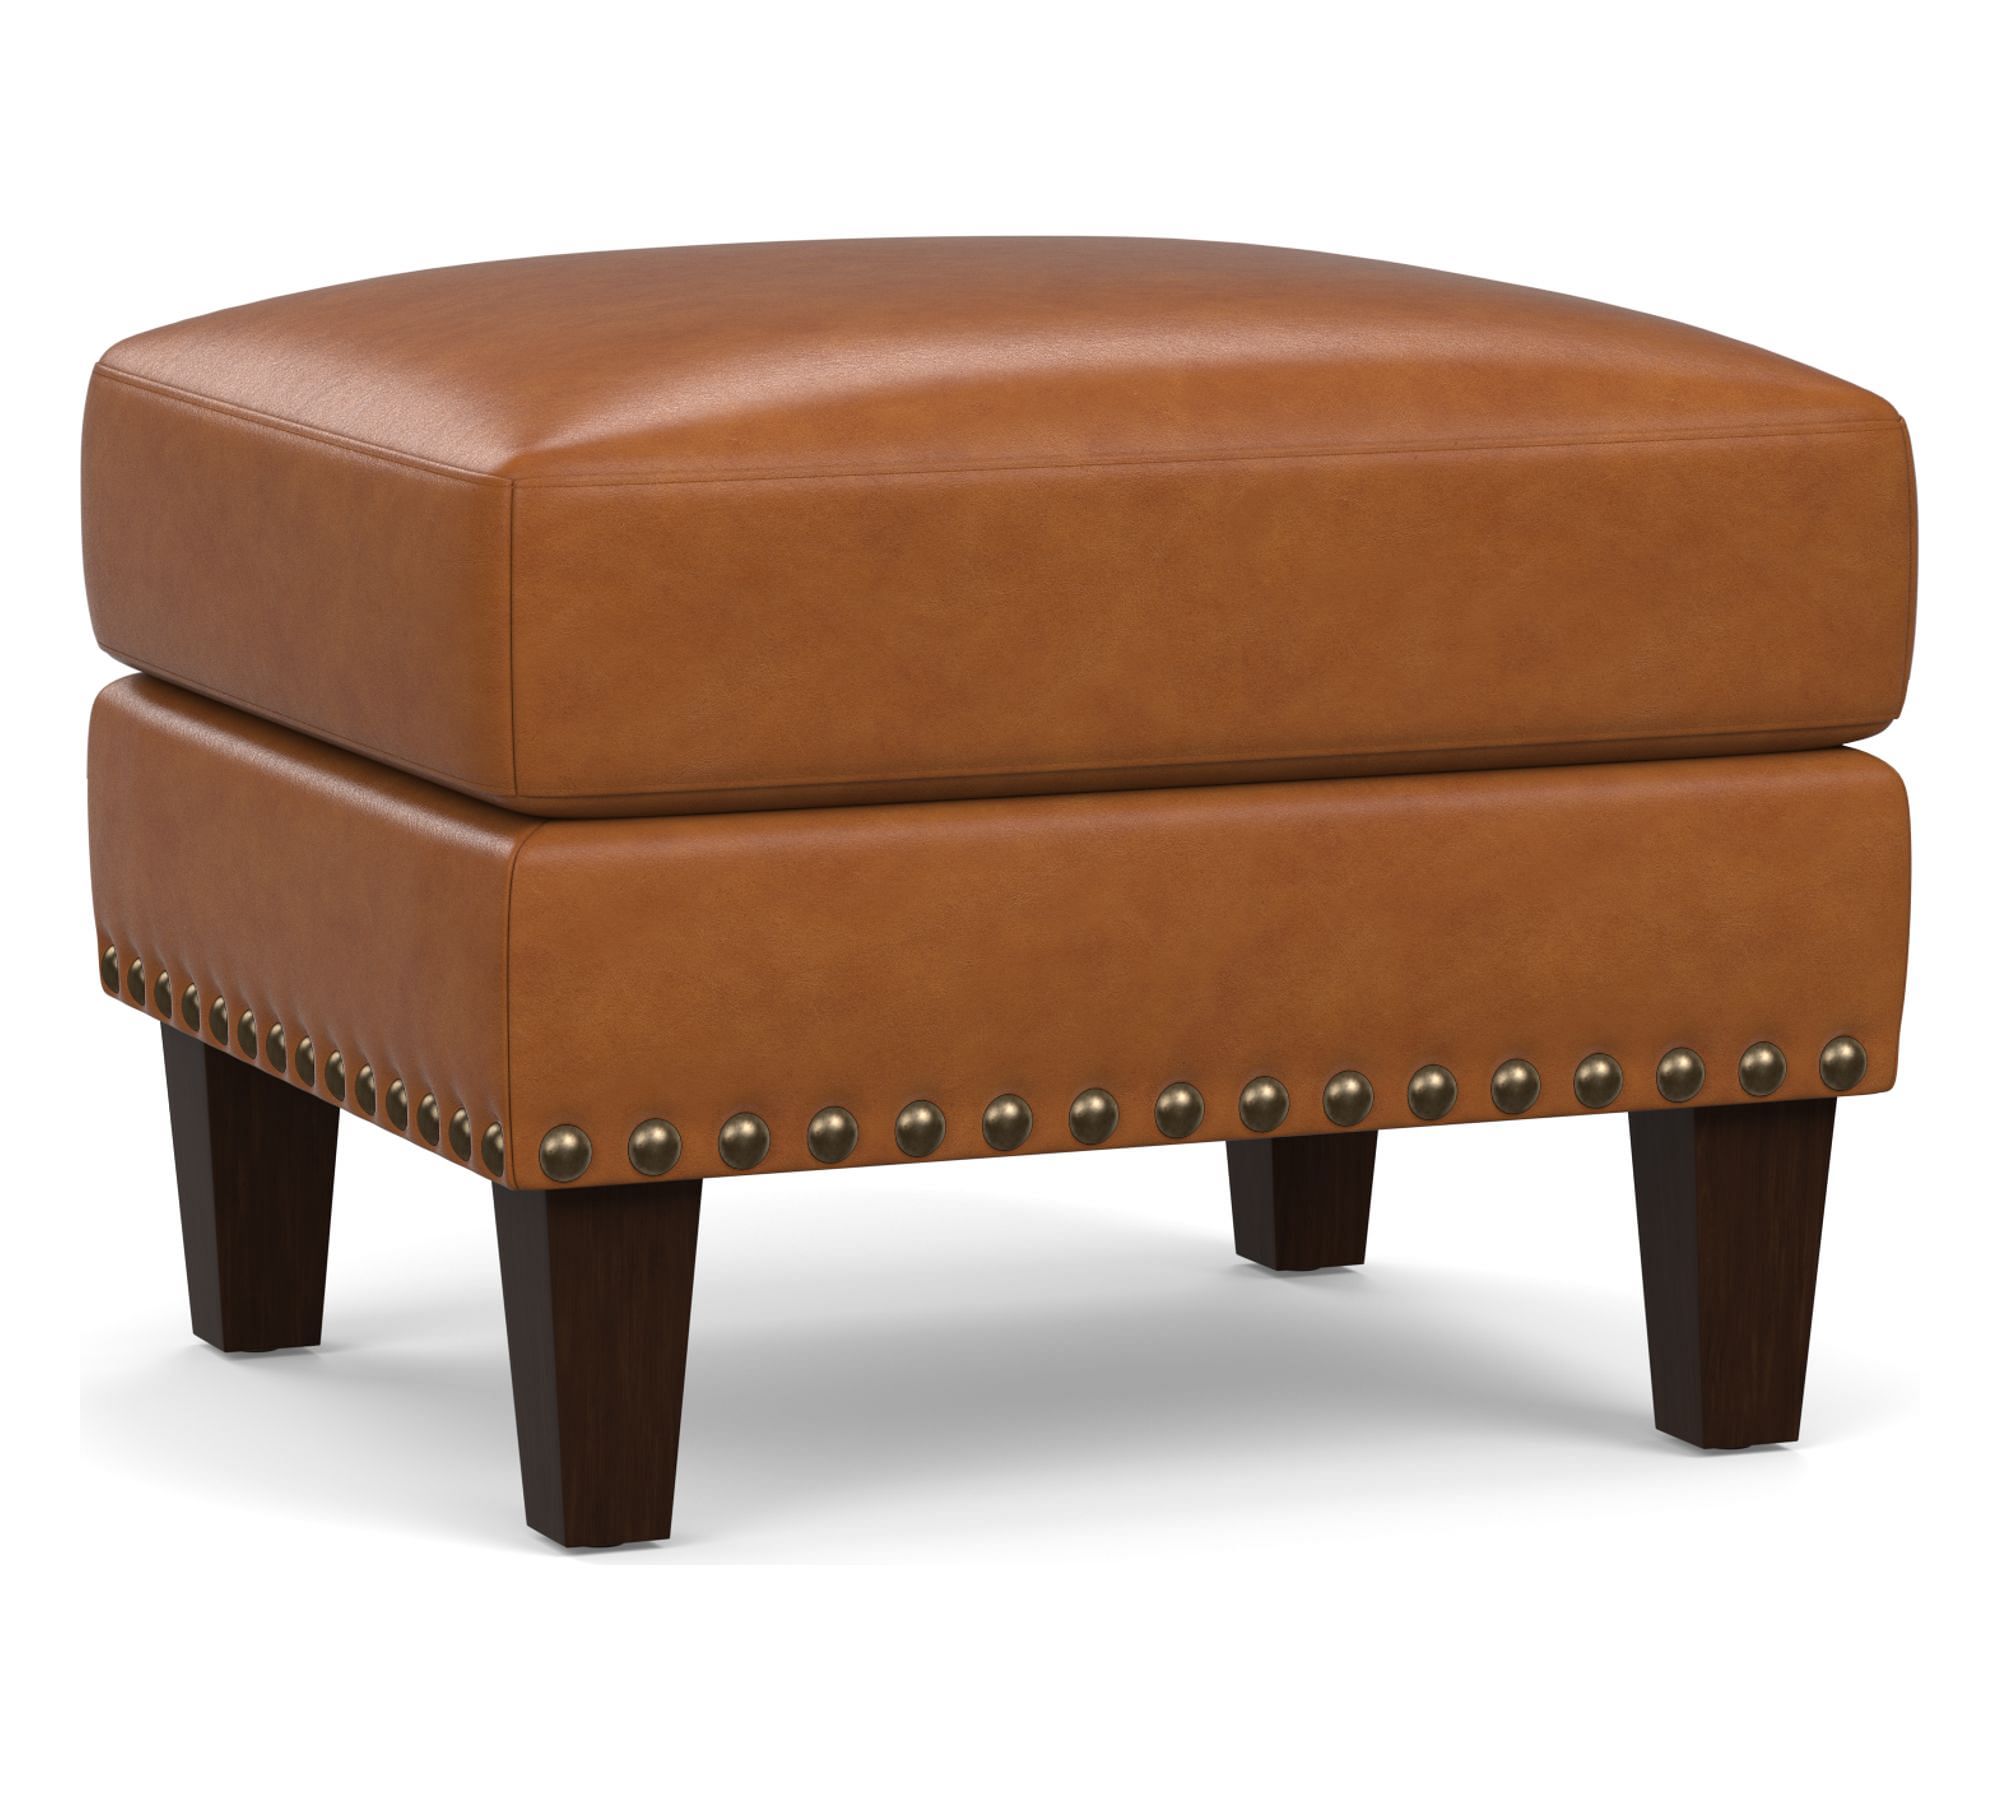 Harlow Leather Ottoman with Nailheads